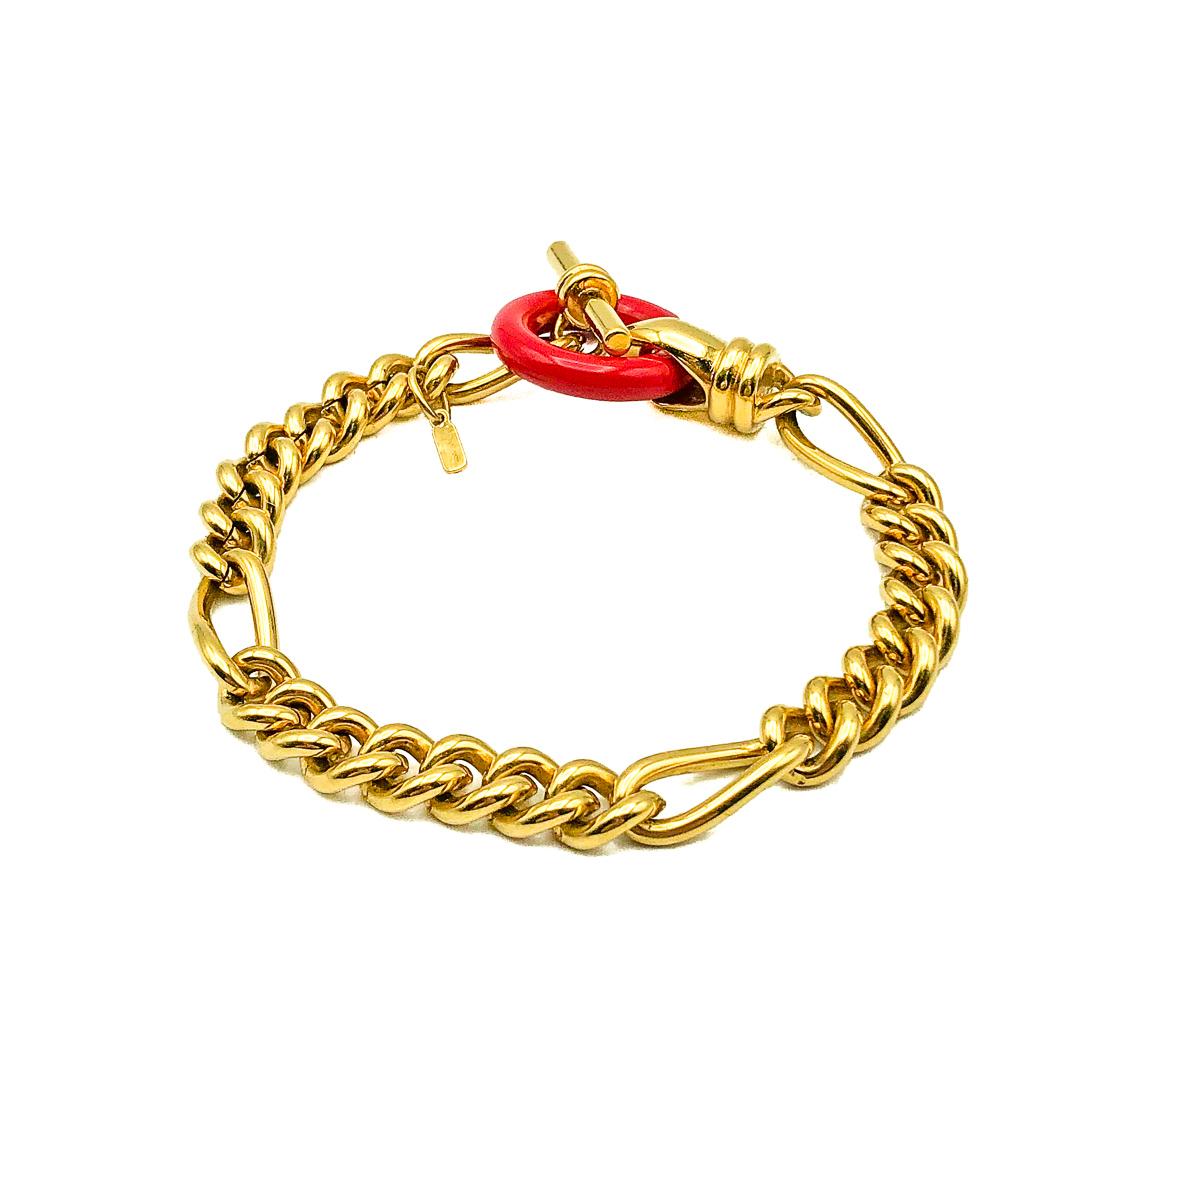 A vintage Monet T Bar Bracelet with a pop of vibrant red for a twist. Crafted in weighty gold plated metal with a red resin hoop. Signed. In very good vintage condition. Approx. 19cms. A very cool bracelet that is cleverly unconventionally